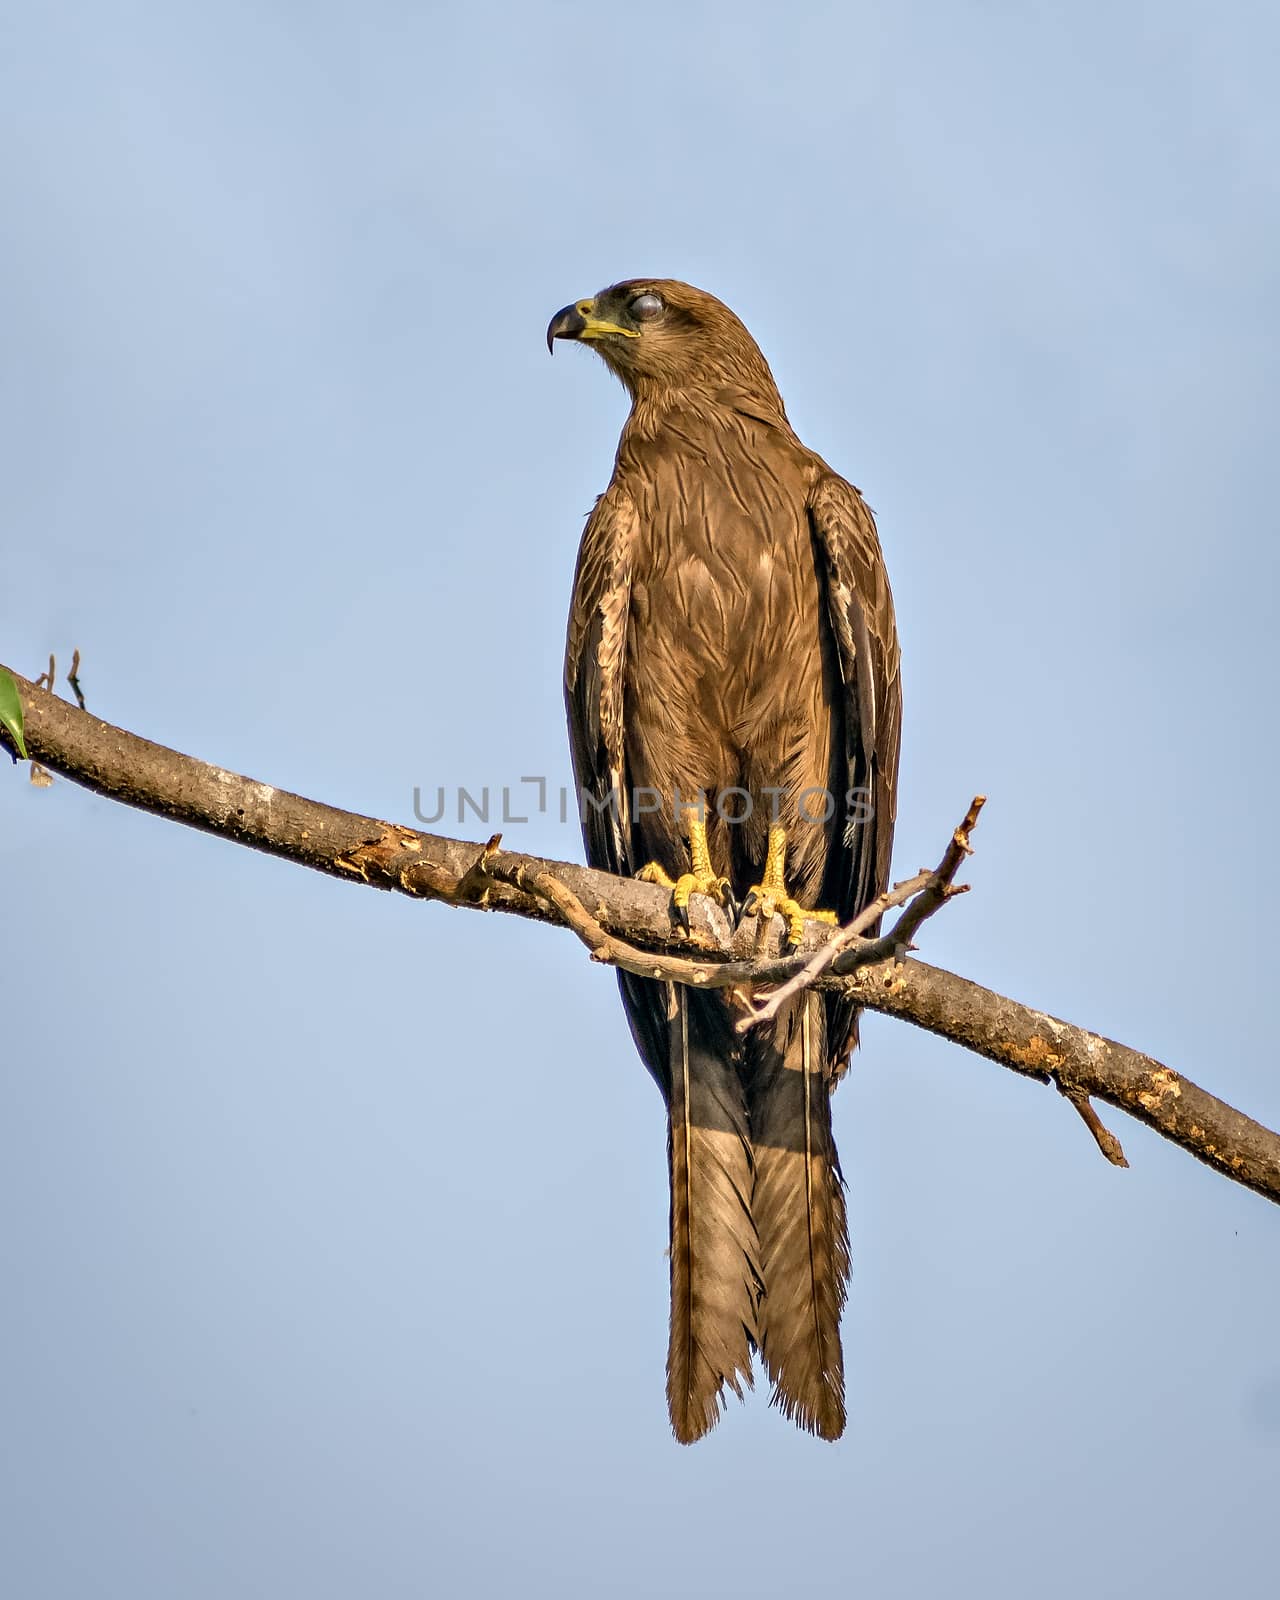 Black kite bird sitting on top of tree.The black kite (Milvus migrans) is a medium-sized bird of prey in the family Accipitridae, which also includes many other diurnal raptors.